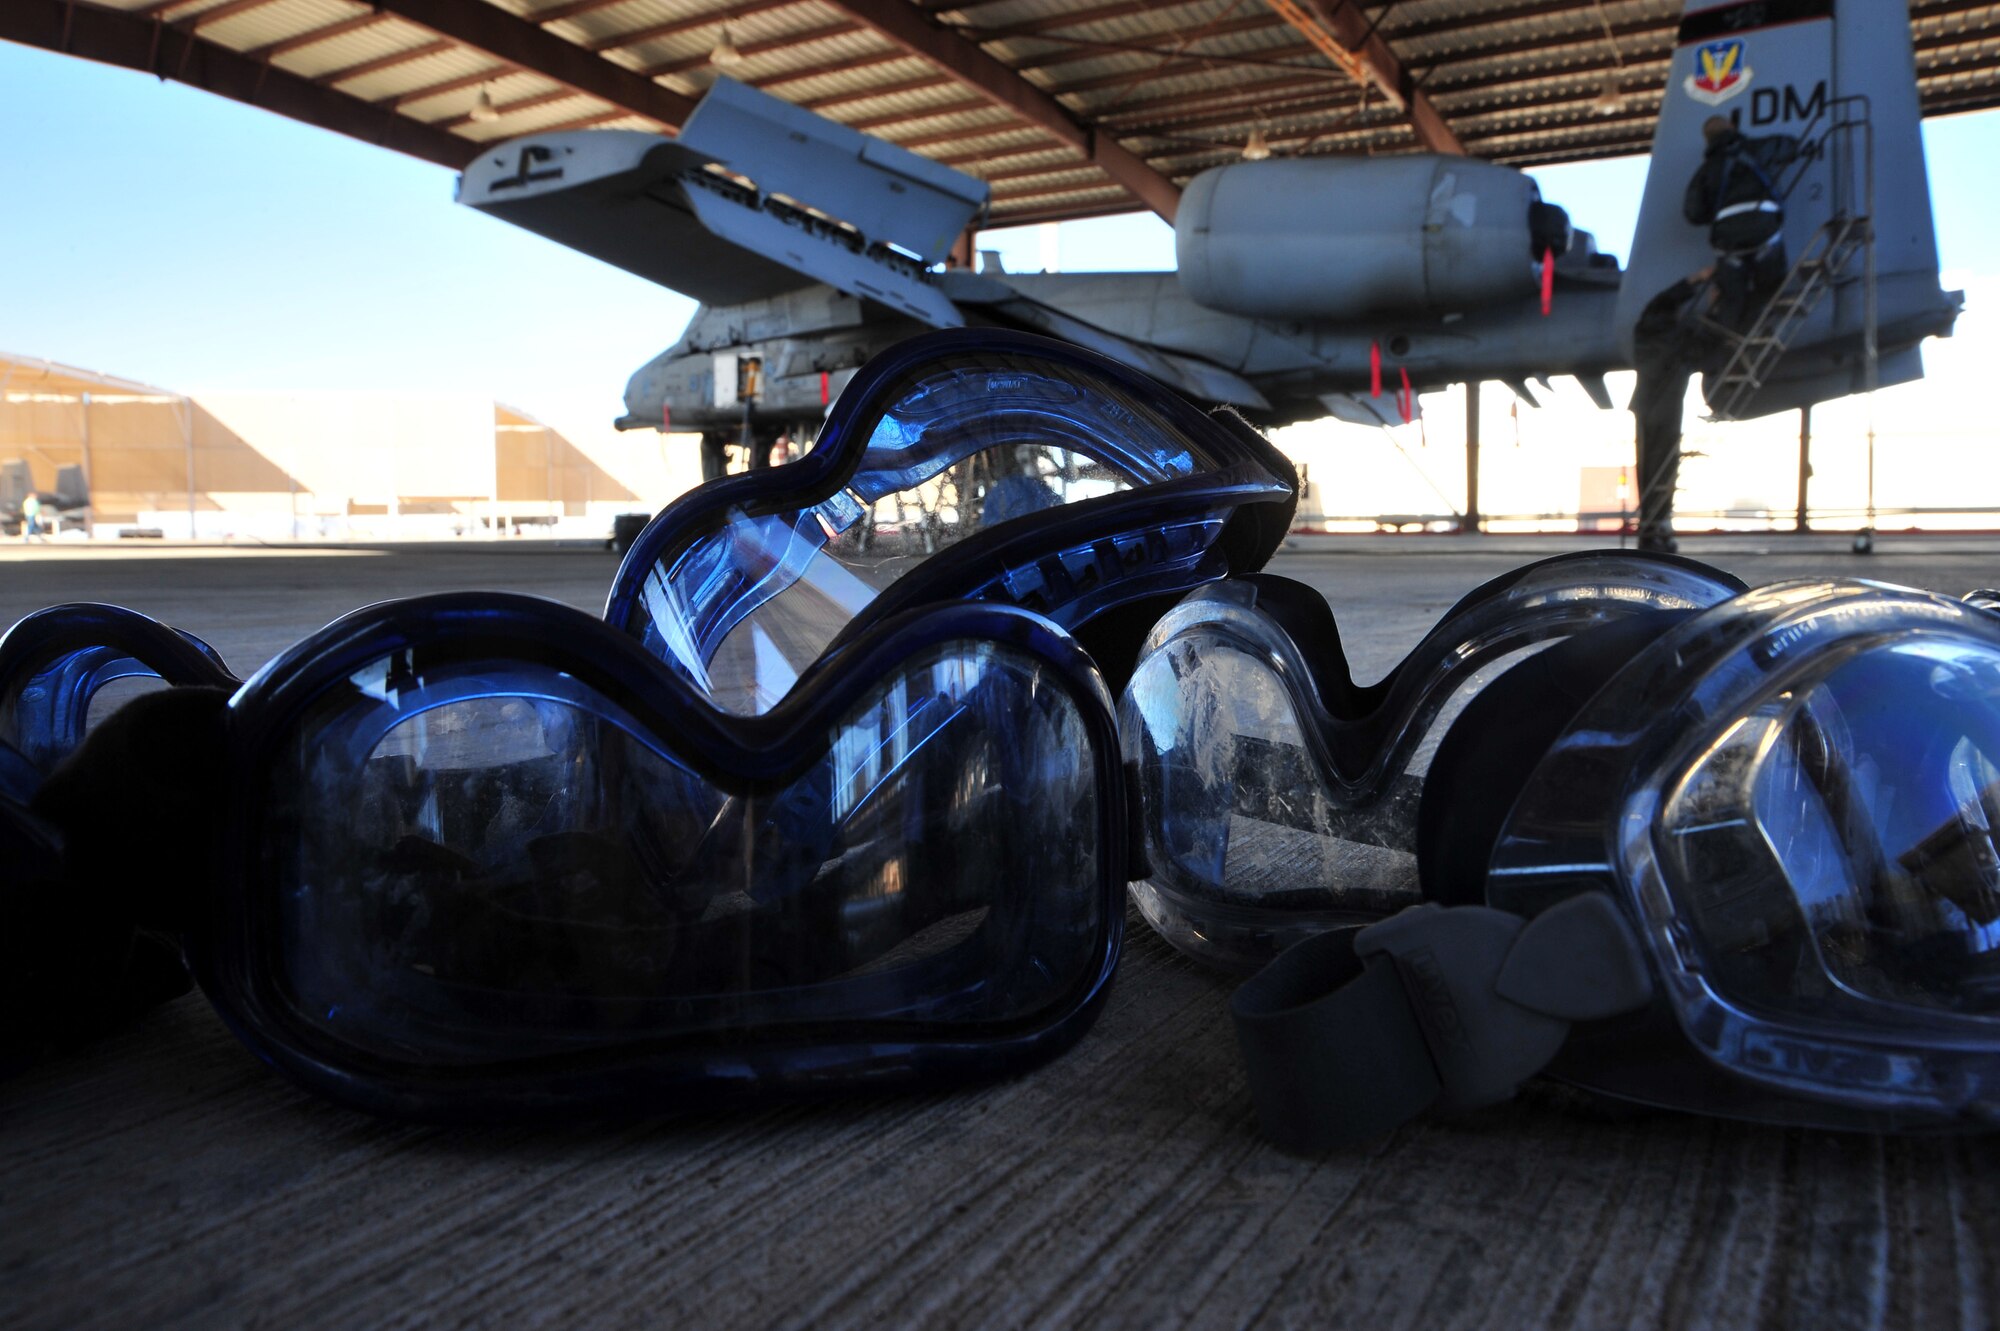 Safety goggles lie on the ground before the 355th Aircraft Maintenance Squadron’s leadership washes an A-10C Thunderbolt at Davis-Monthan Air Force Base, Ariz., Jan 28., 2014. Leadership made a deal with their Airmen that if the squadron went 60 days without any safety or technical violations they would wash the aircraft for them.(U.S. Air Force photo by Senior Airman Josh Slavin/released)